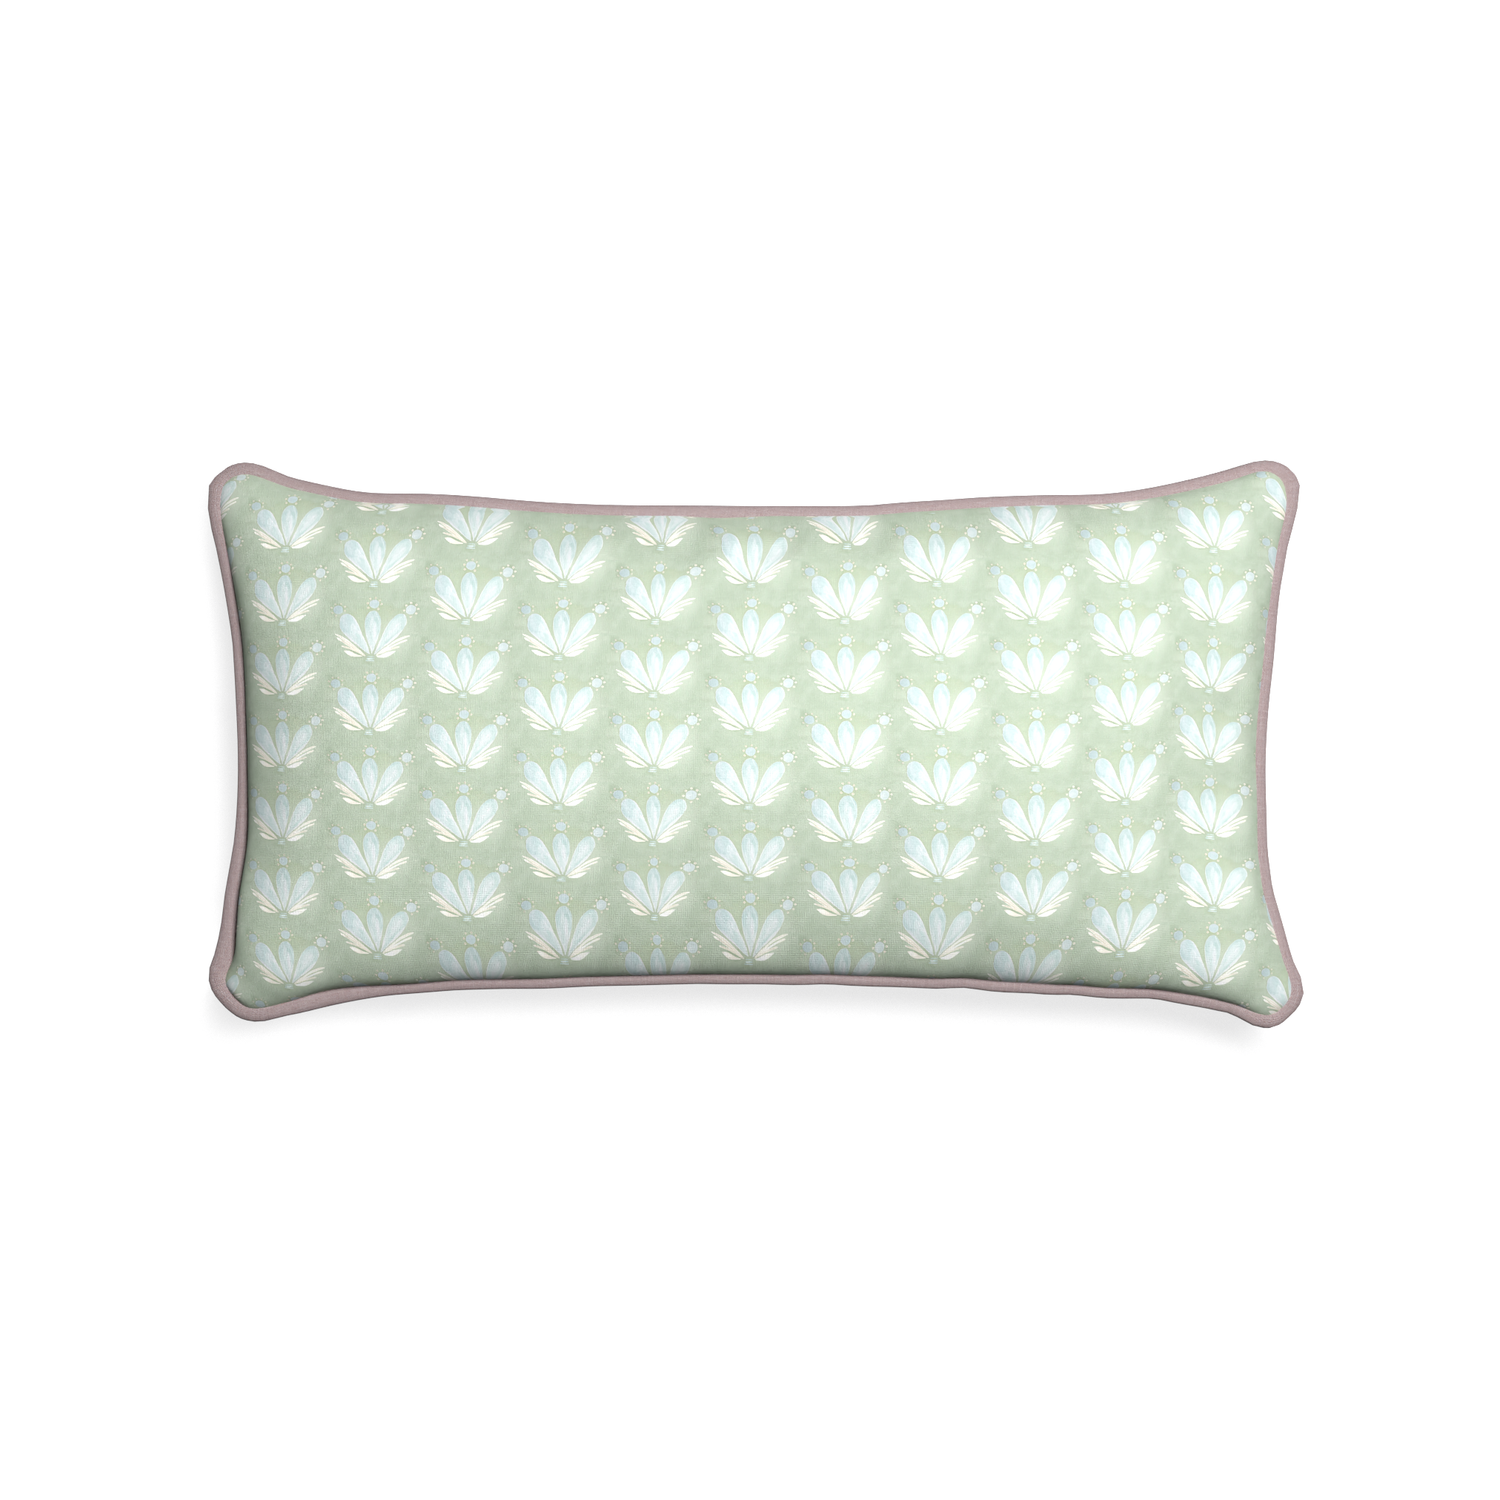 Midi-lumbar serena sea salt custom blue & green floral drop repeatpillow with orchid piping on white background